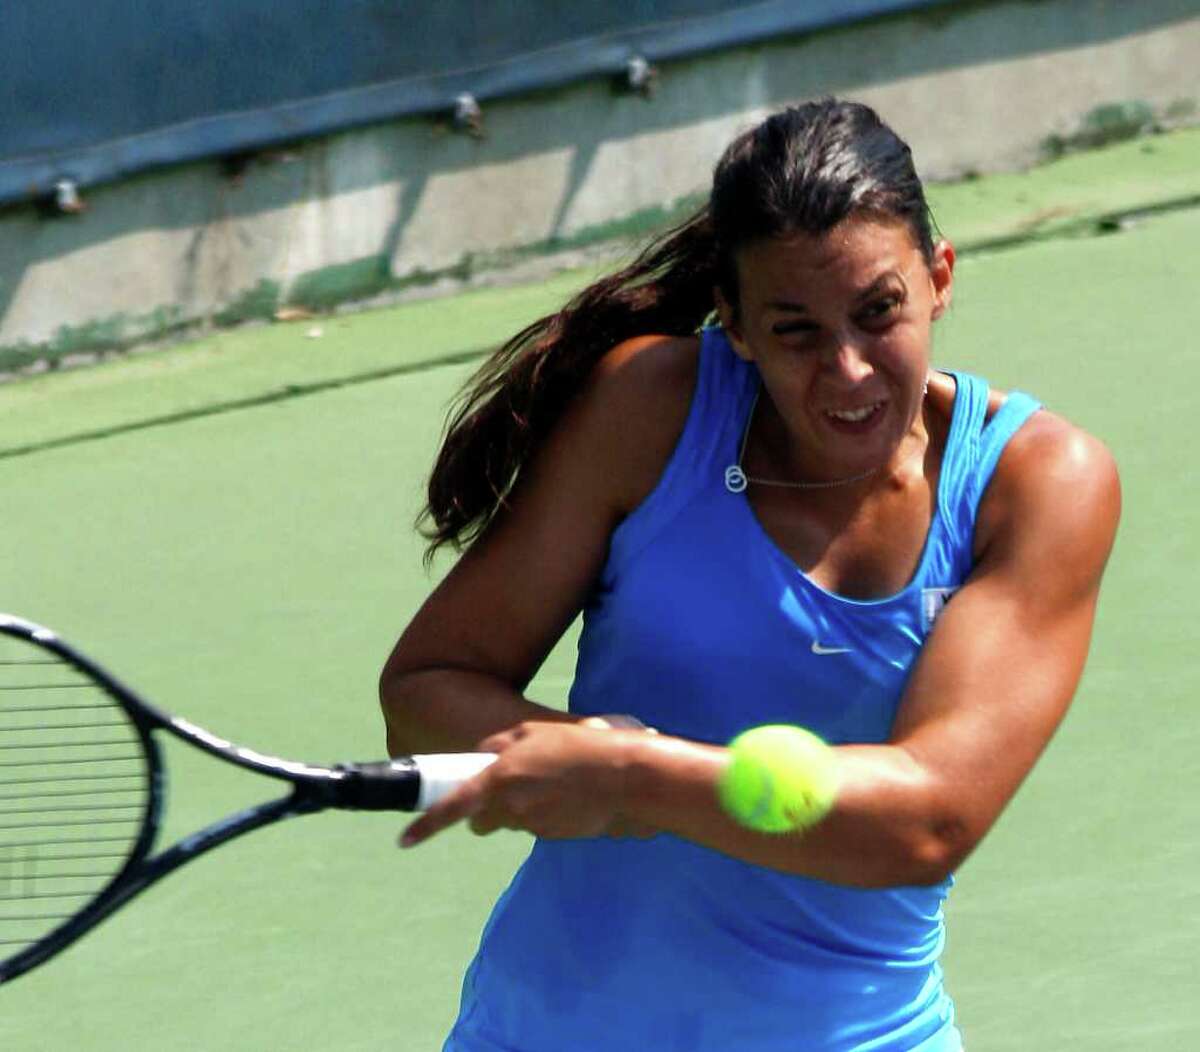 Marion Bartoli, from France, returns a volley to Daniela Hantuchova, from Slovakia, during a match at the Western & Southern Open tennis tournament, Thursday, Aug. 18, 2011, in Mason, Ohio. (AP Photo/David Kohl)